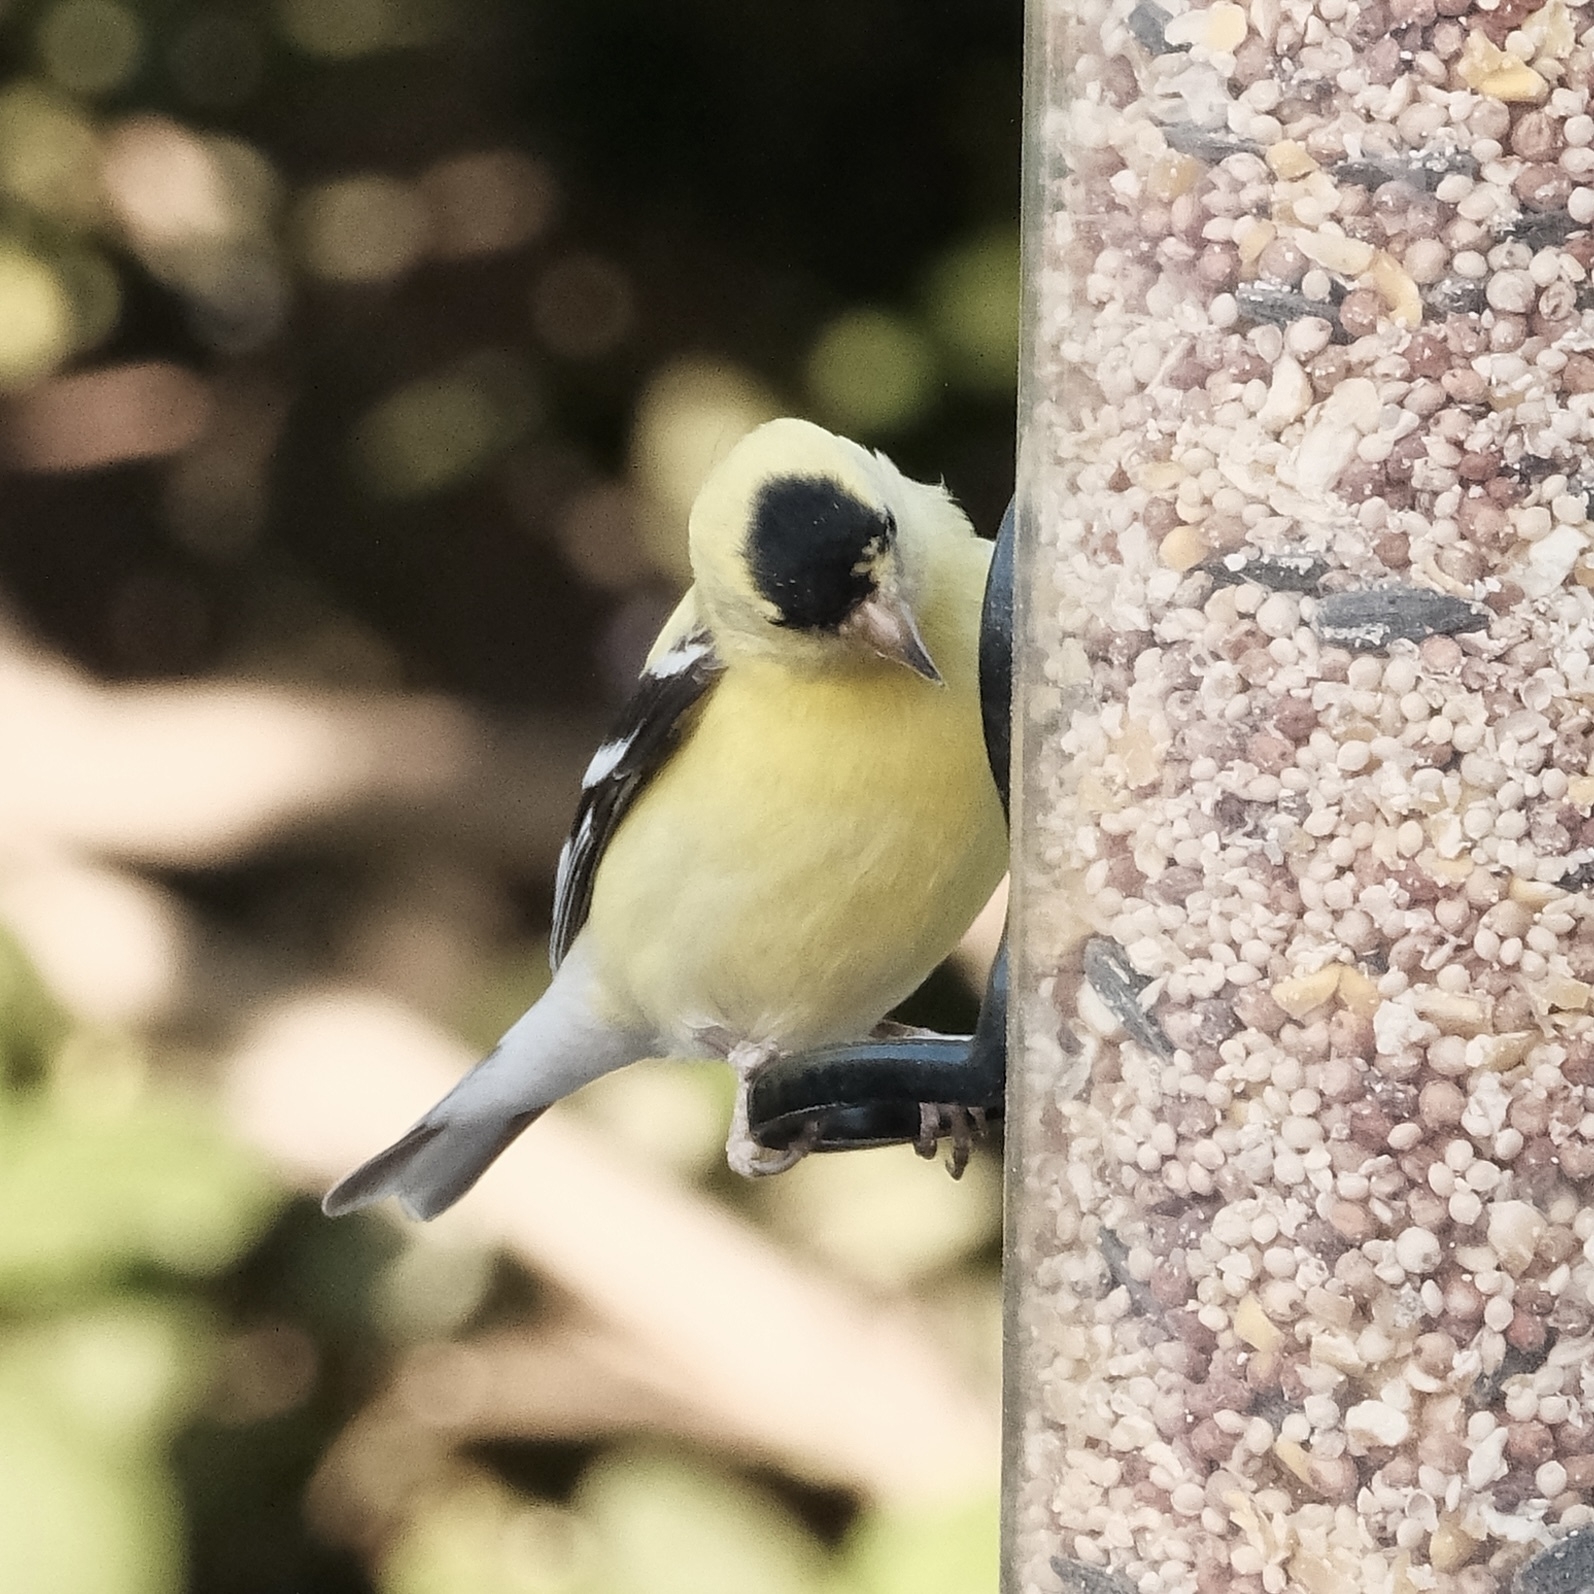 The American Gold Finch, peering into a bird feeder hole, has a black cap and, besides it’s wings, an all light yellow body. Only the front edge of its right wing is visible and it is mostly black with some white patches. The bird is partially obscured by a vertical transparent bird feeder with a blurry (bokeh) green vegetation background.